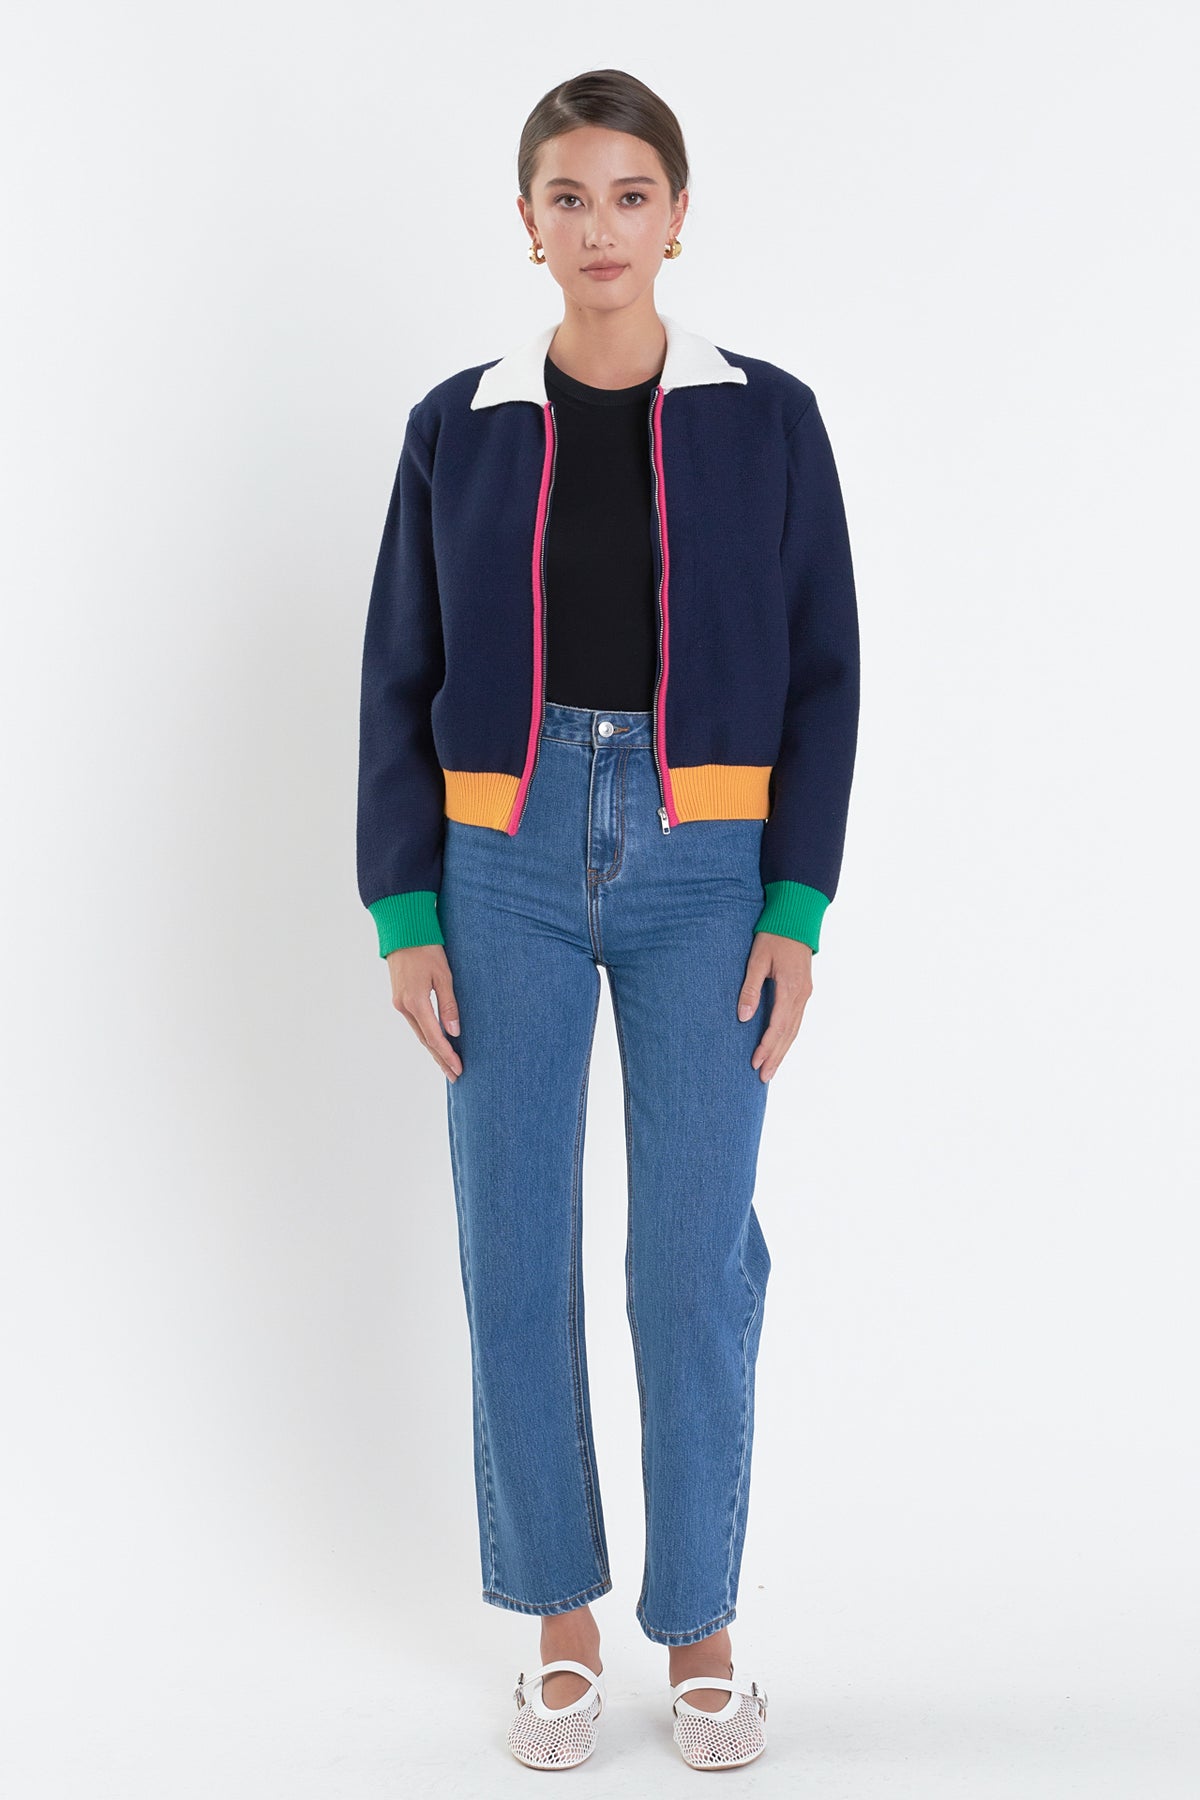 ENGLISH FACTORY - Colorblock Zip Up Cardigan - JACKETS available at Objectrare